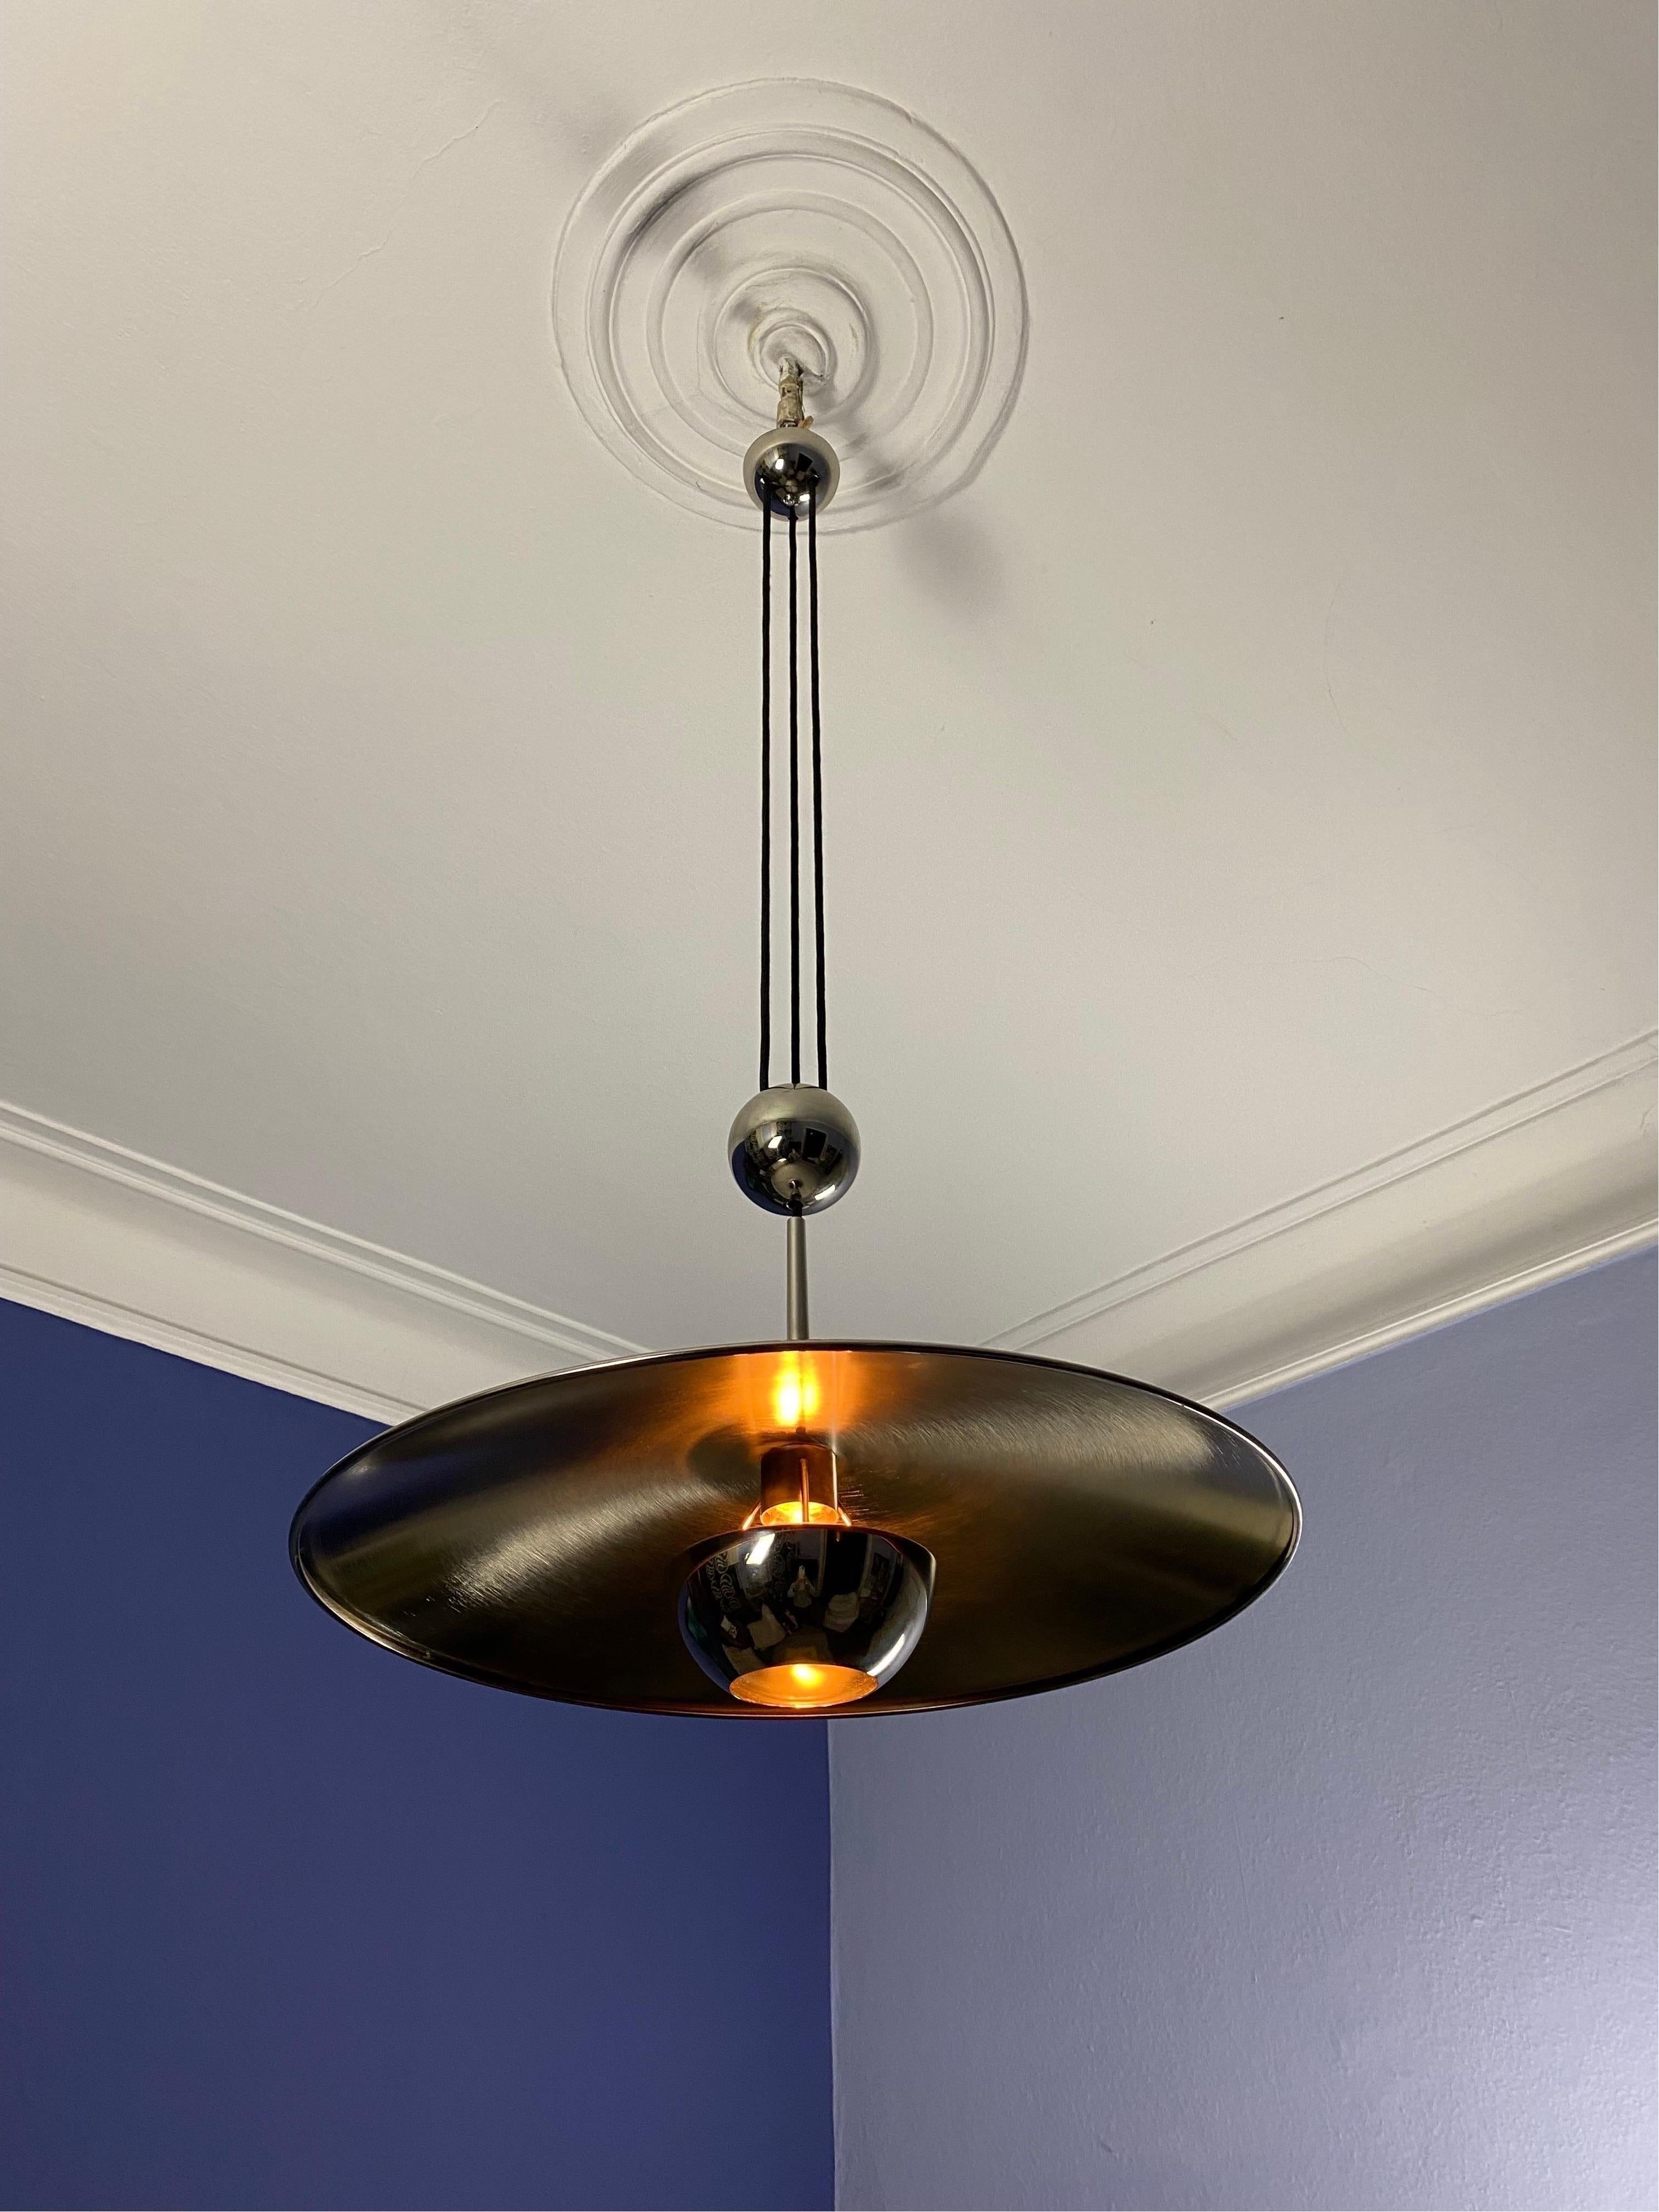 Adjustable  Pendant Onos55 by Florian Schulz with a Central Counterweight 7